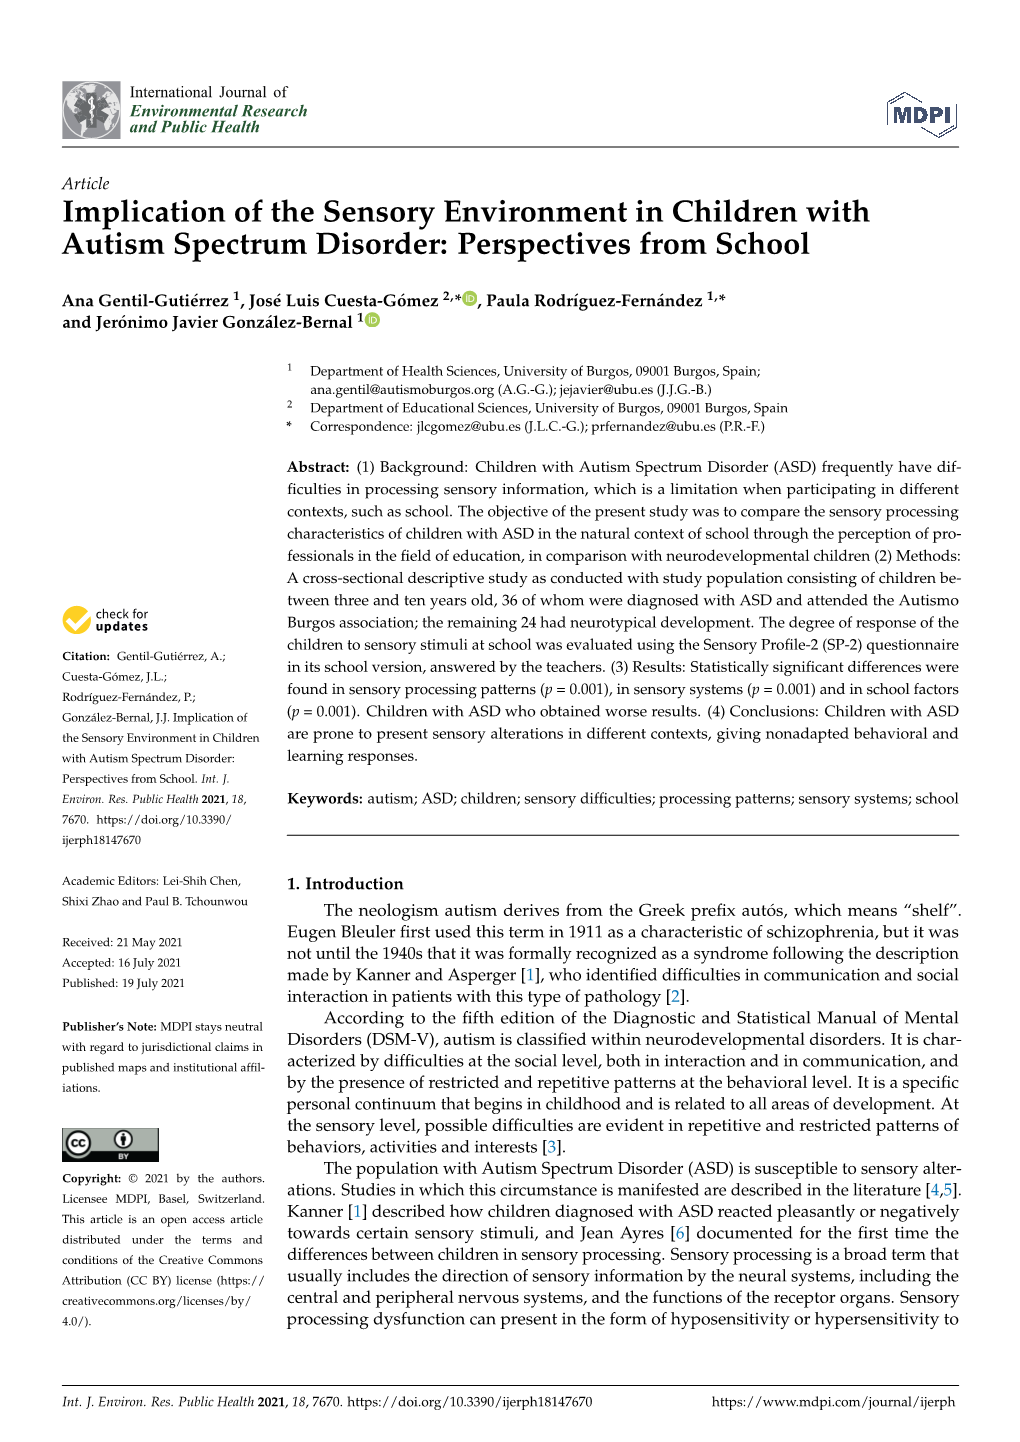 Implication of the Sensory Environment in Children with Autism Spectrum Disorder: Perspectives from School